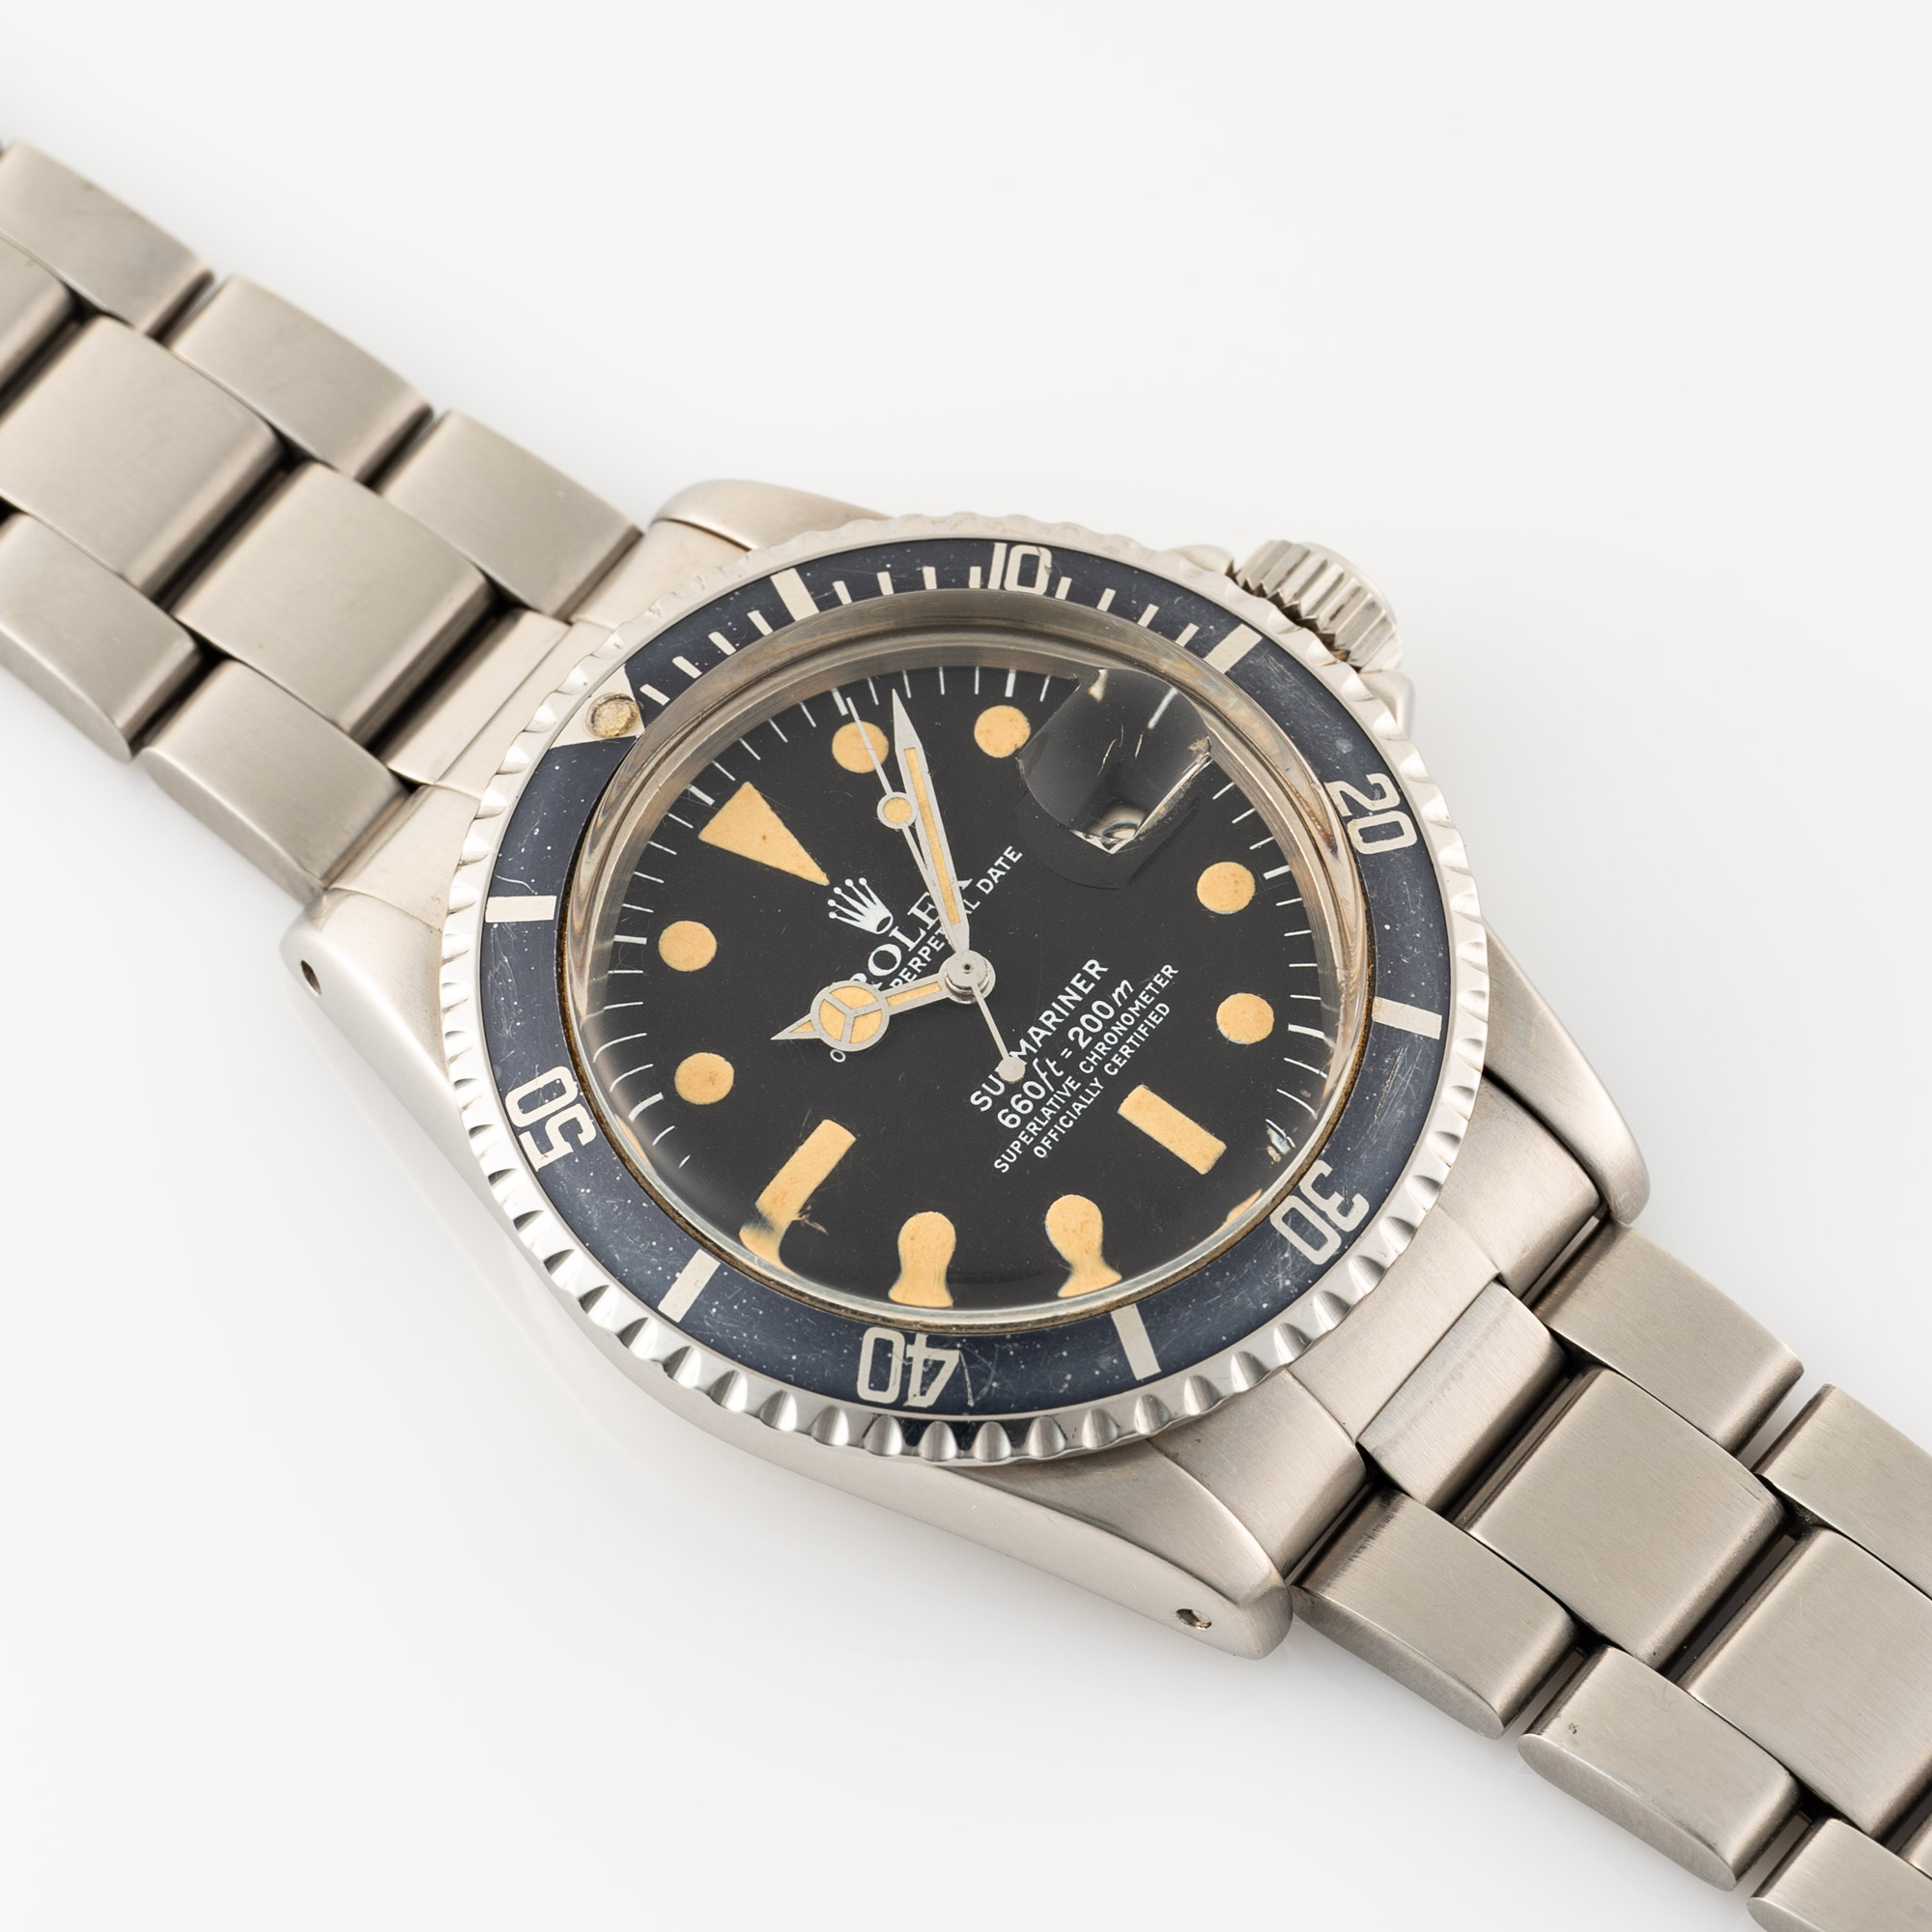 A GENTLEMAN'S SIZE STAINLESS STEEL ROLEX OYSTER PERPETUAL DATE SUBMARINER BRACELET WATCH CIRCA 1979, - Image 4 of 10